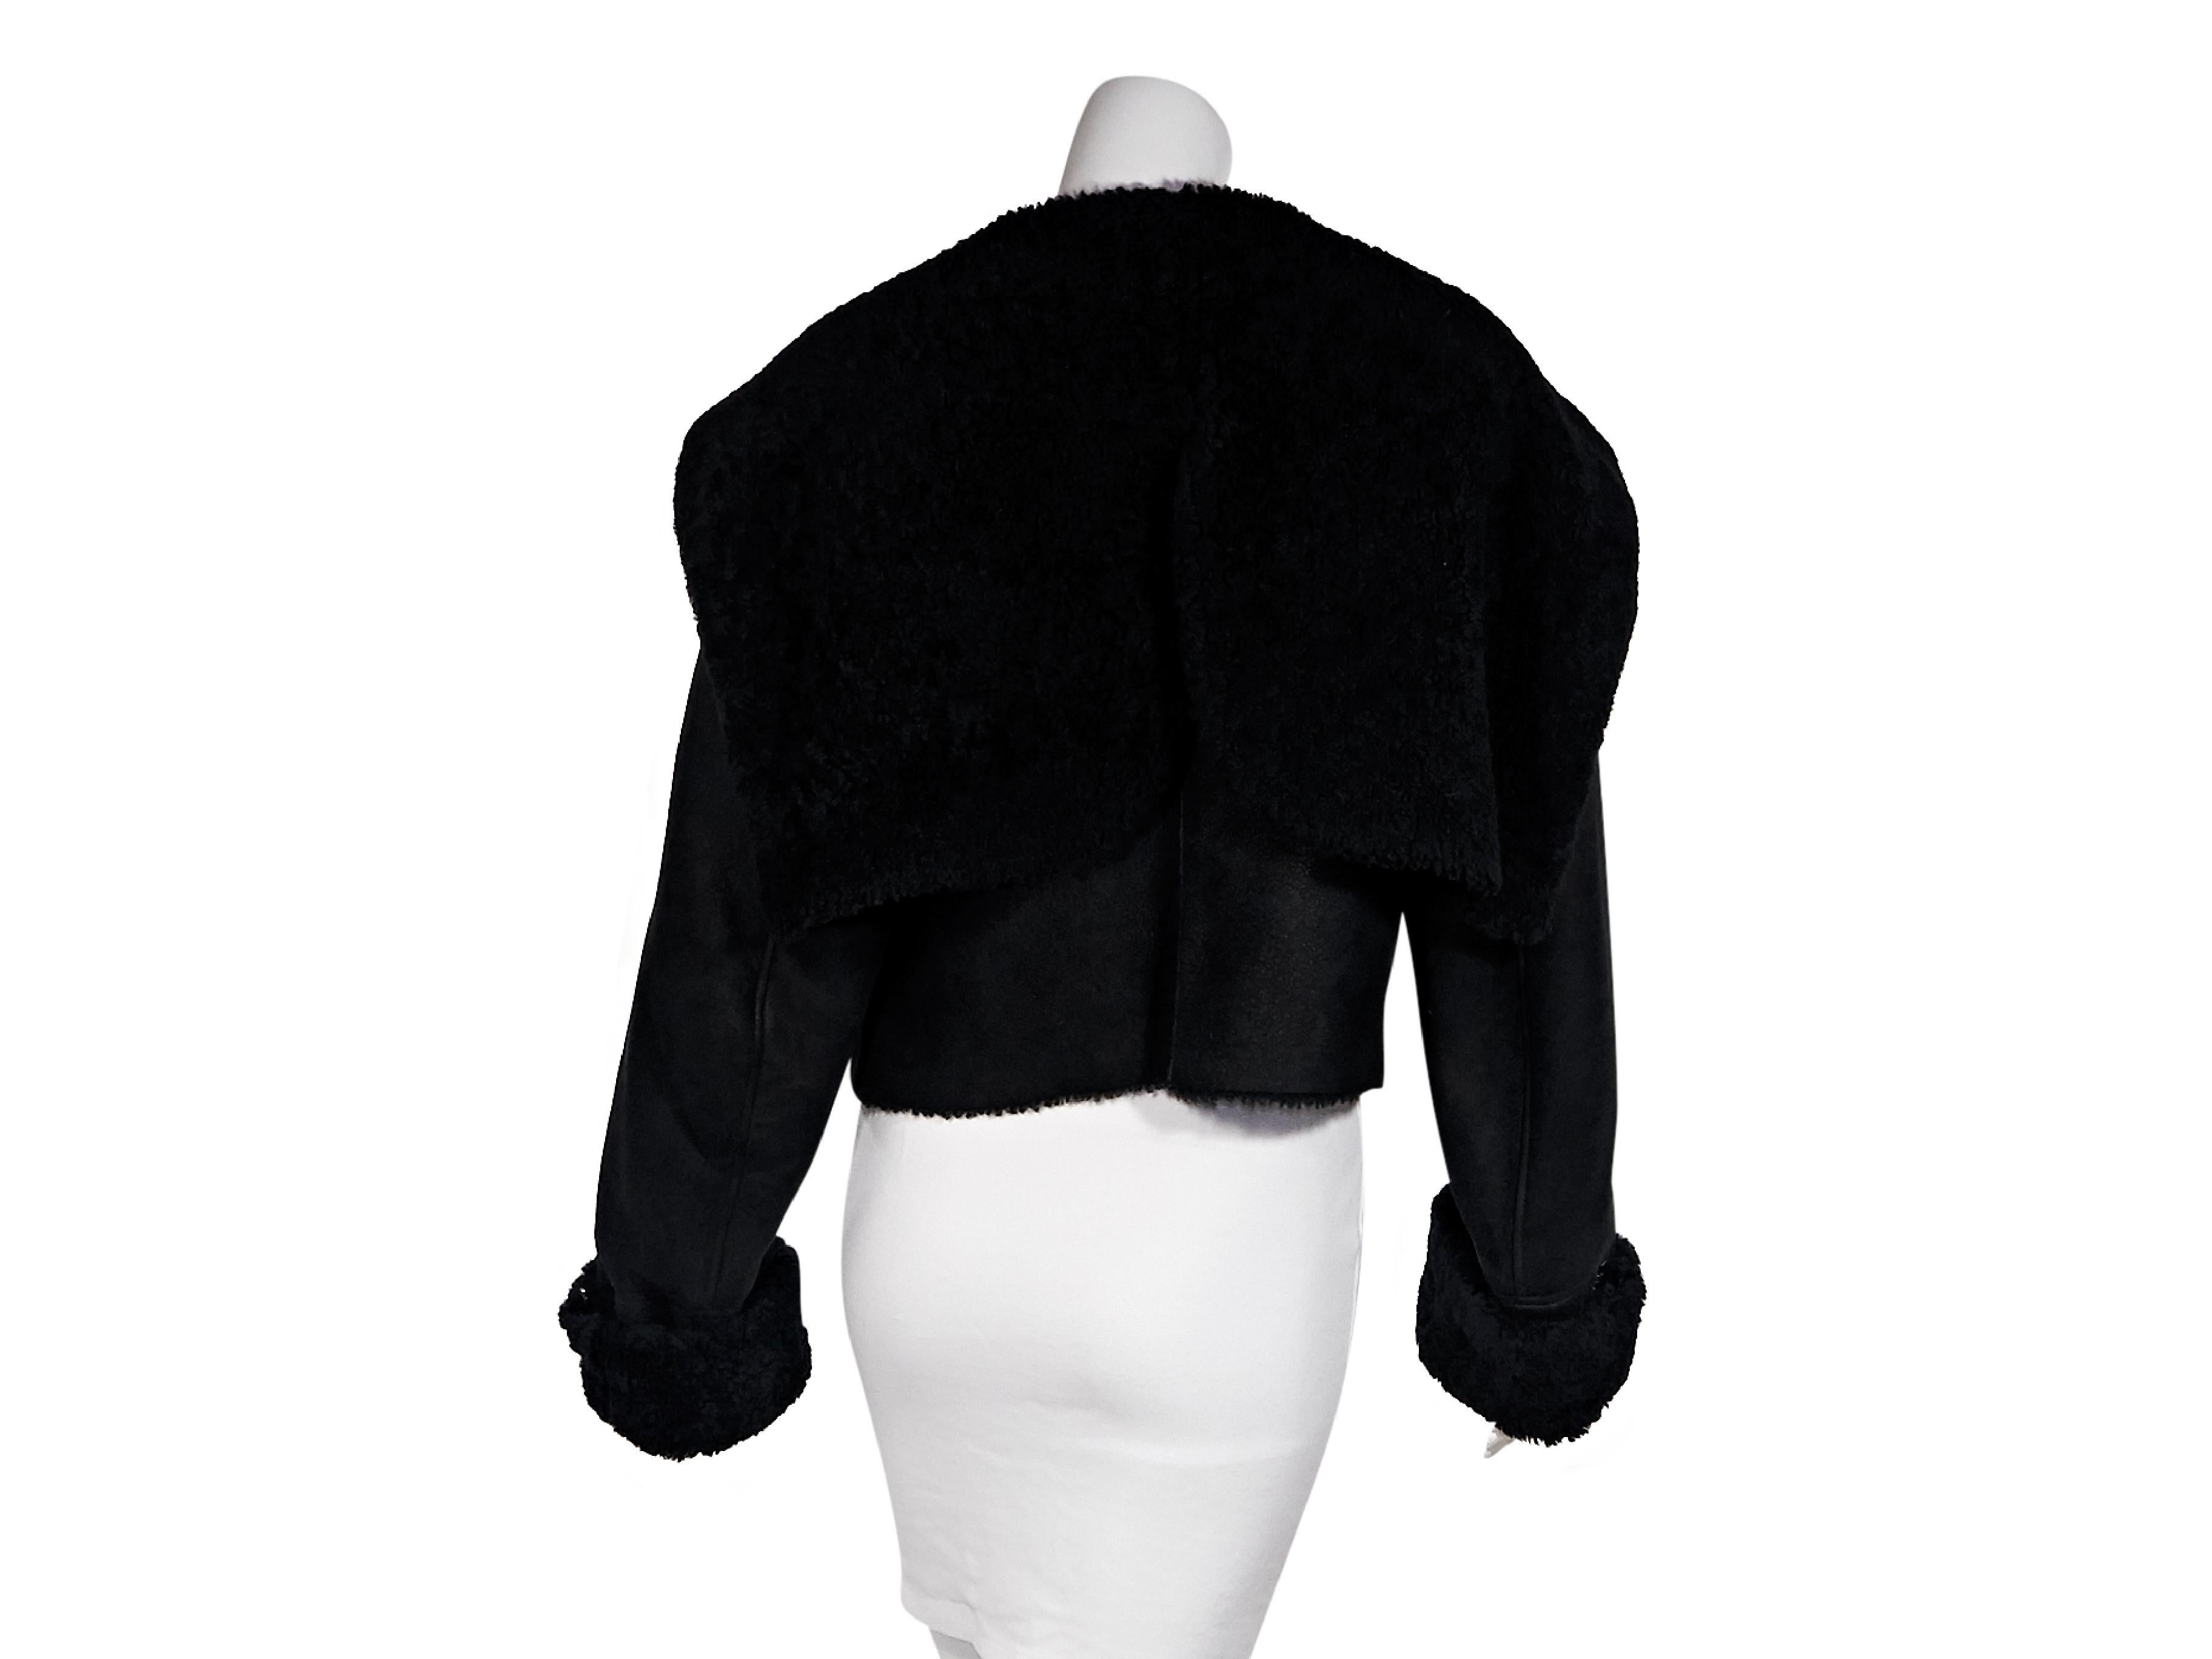 Product details:  Black shearling cropped jacket by Yeezy.  Exaggerated collar.  Long sleeves.  Asymmetrical zip-front closure.  Waist zip pockets.  Black hardware.  37